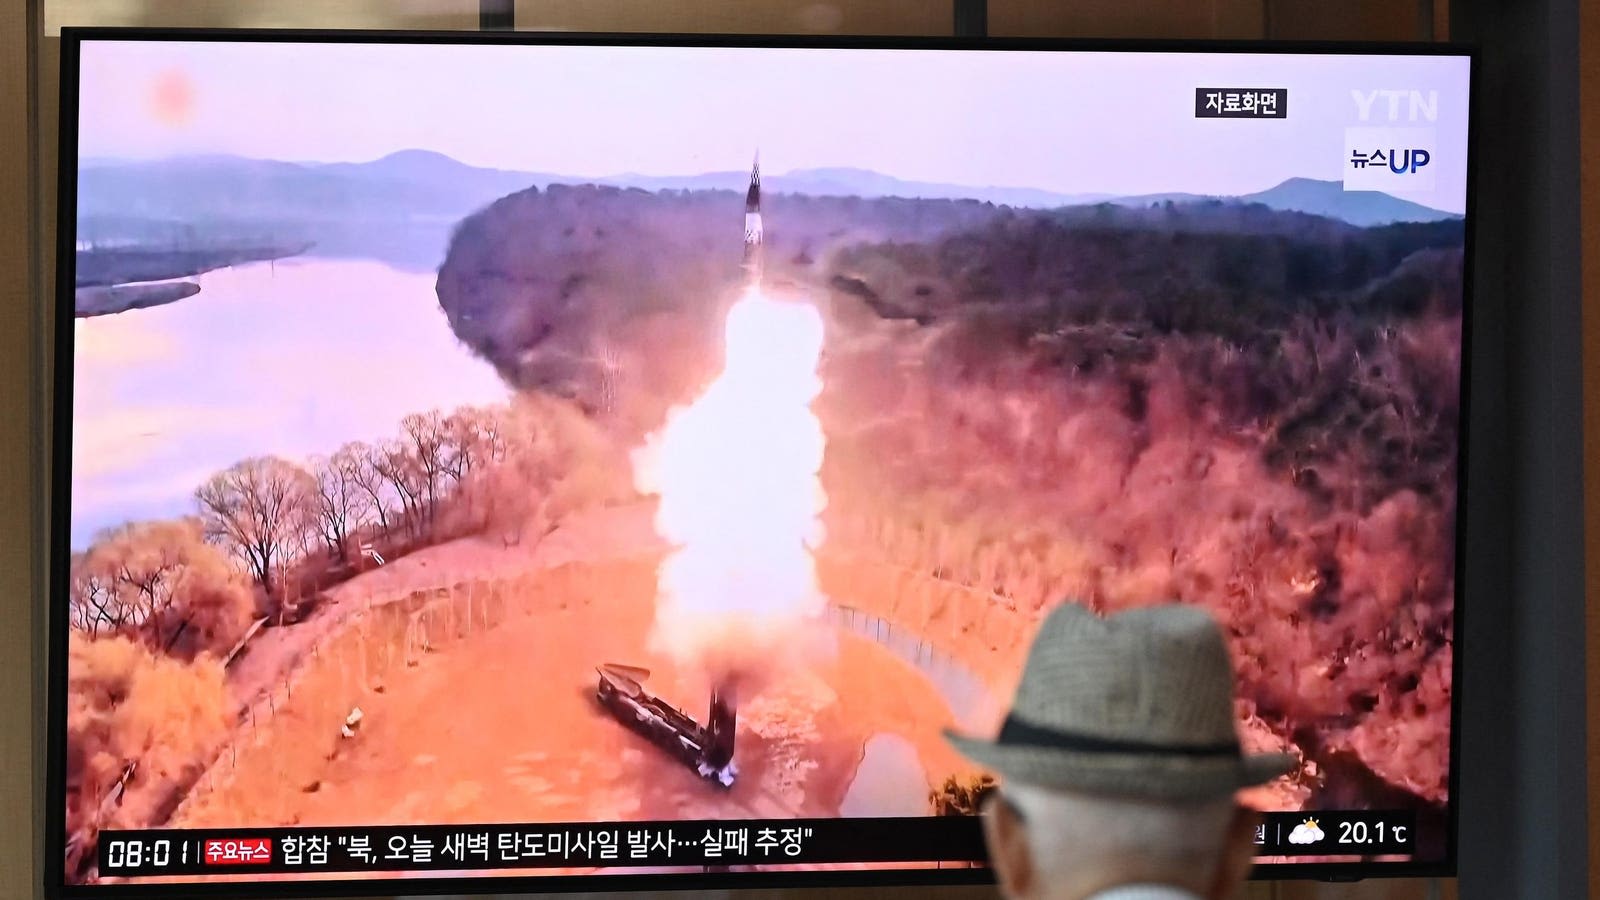 North Korea’s Failed Launch Of Suspected Hypersonic Missile Comes Amid Growing Tensions With South Korea